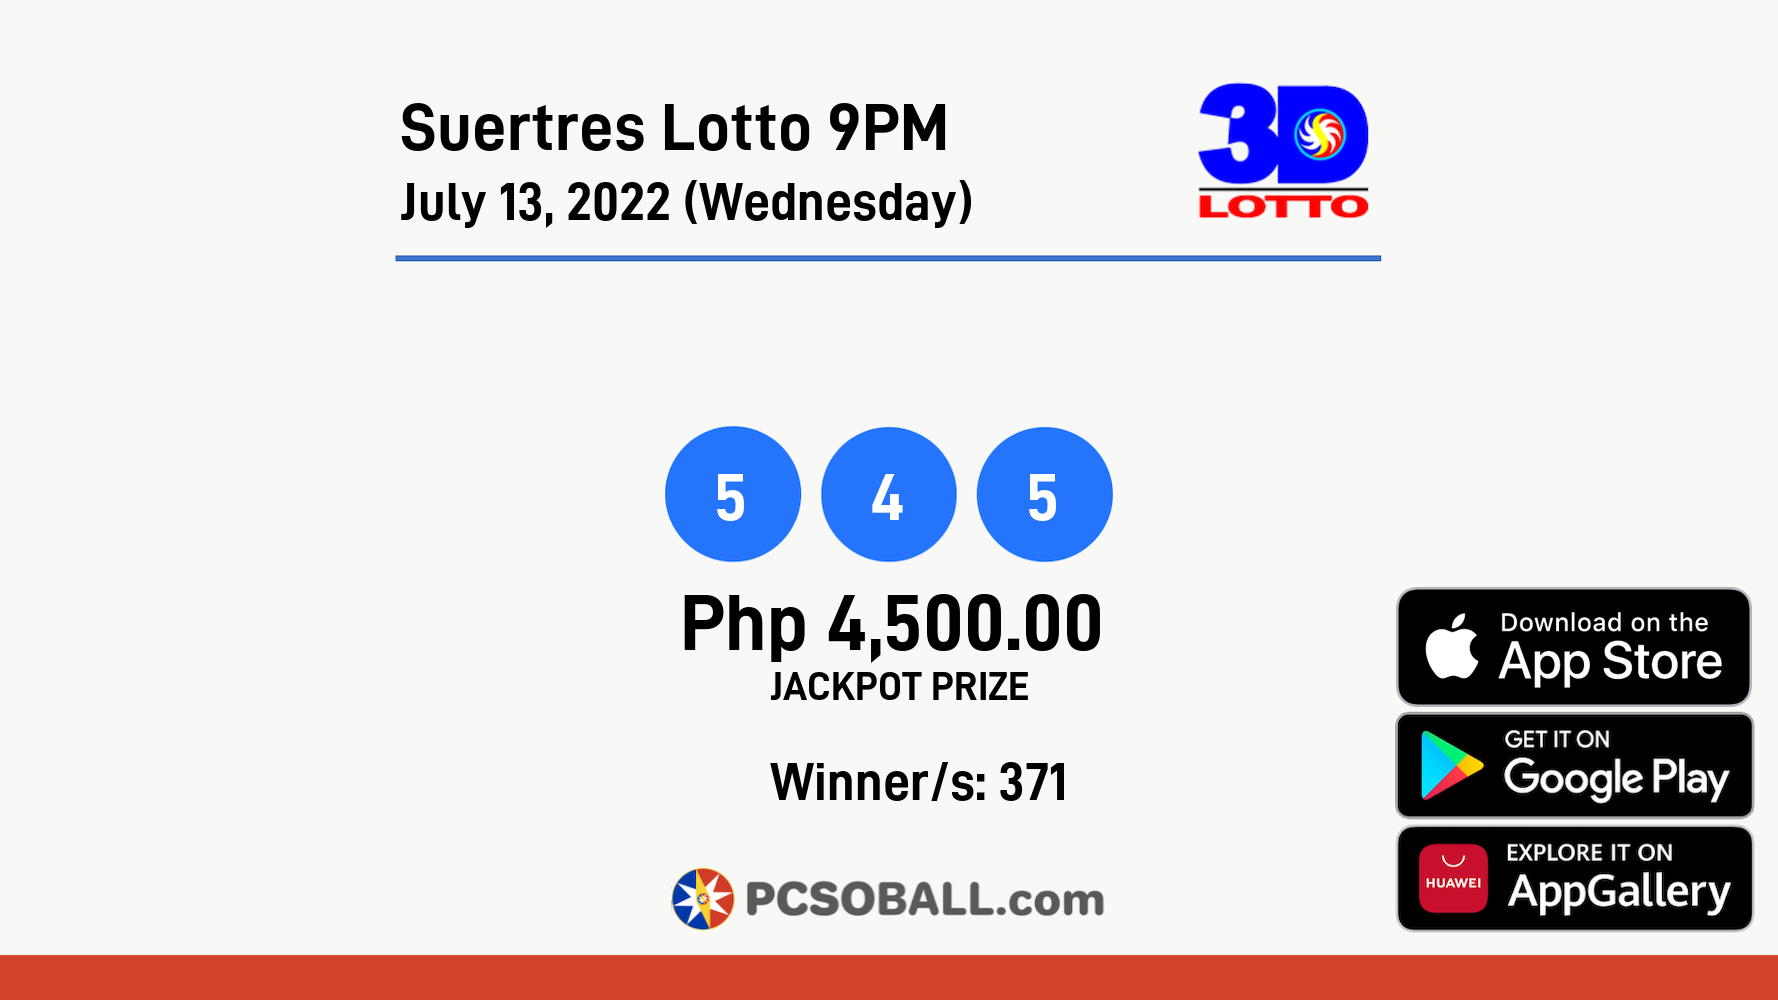 Suertres Lotto 9PM July 13, 2022 (Wednesday) Result